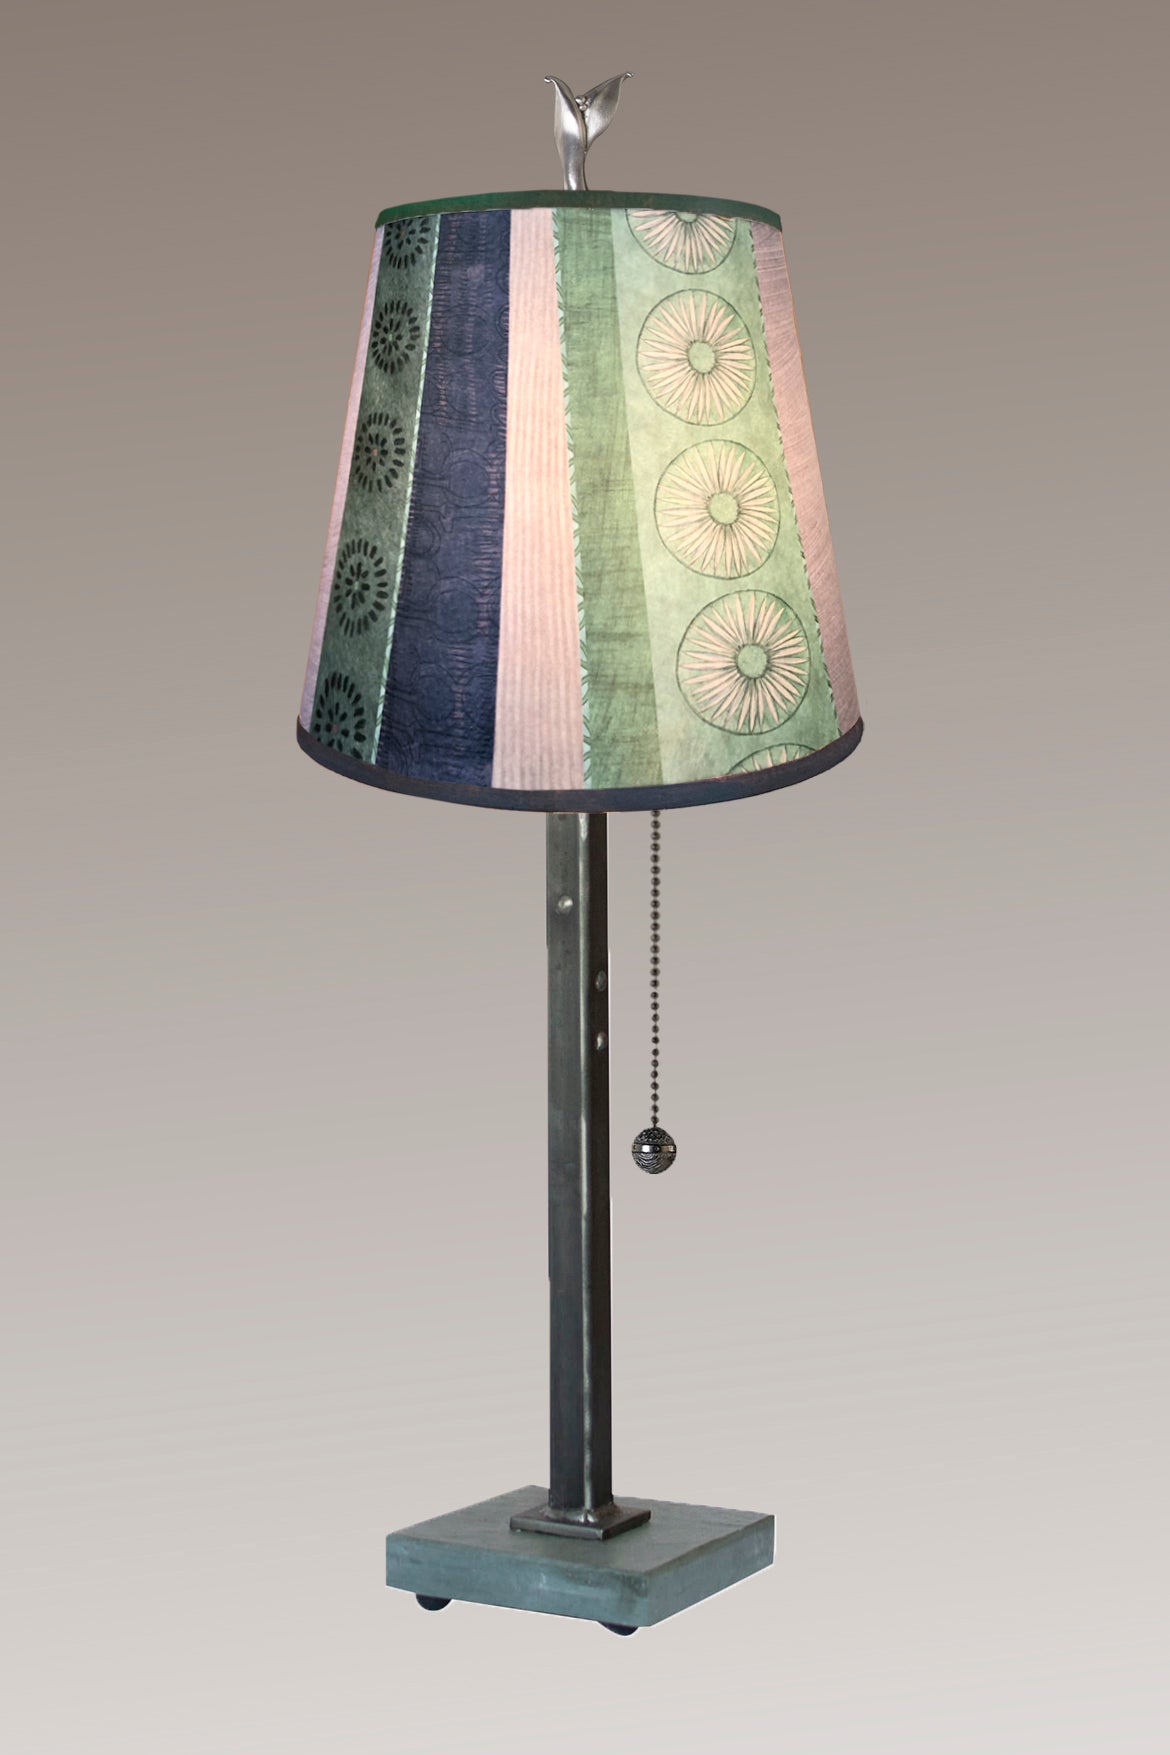 Janna Ugone & Co Table Lamps Steel Table Lamp with Small Drum Shade in Serape Waters